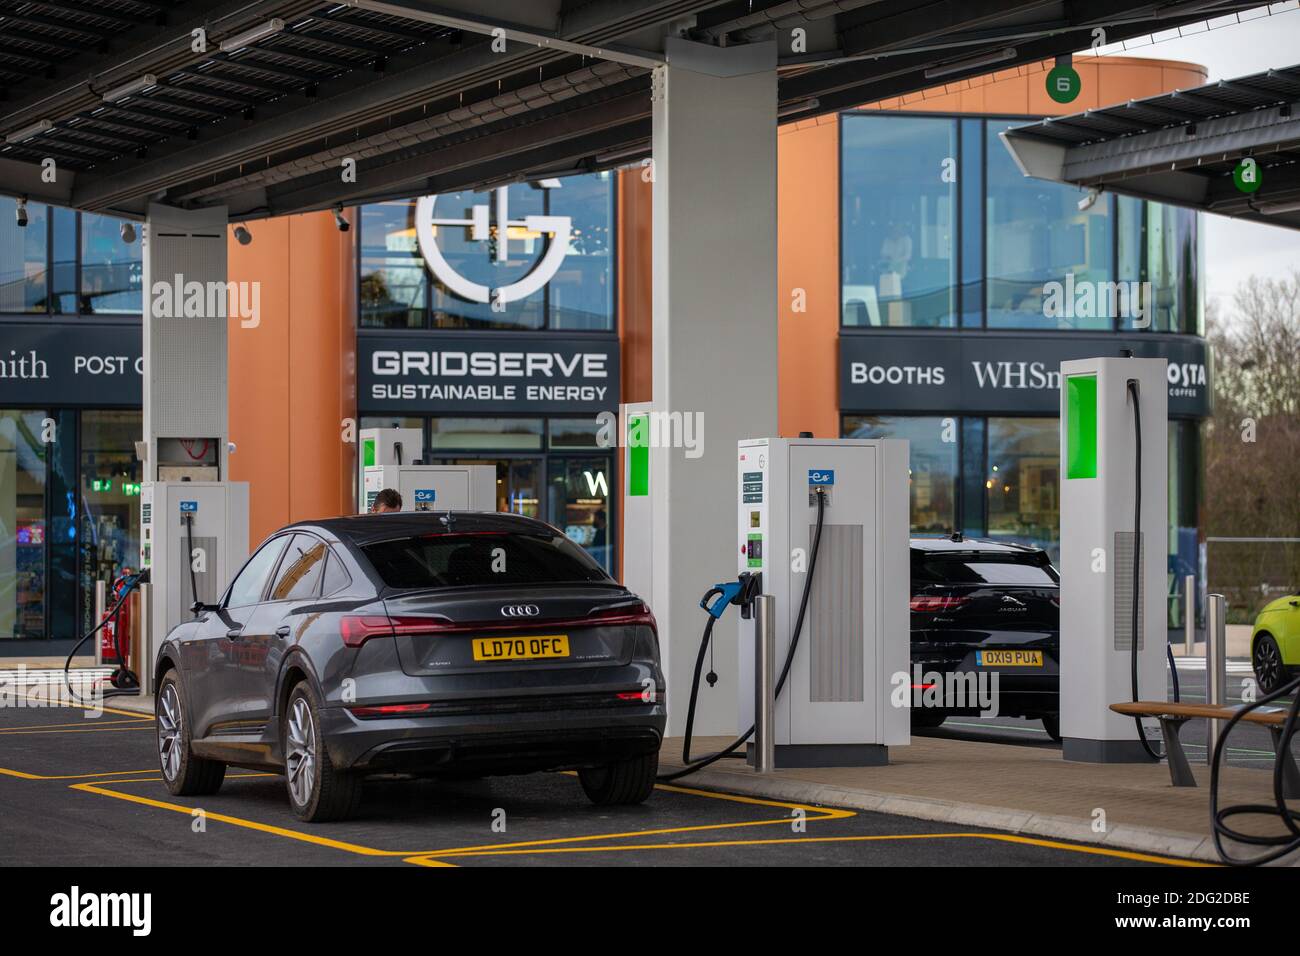 picture-dated-december-2020-shows-the-uk-s-first-electric-forecourt-in